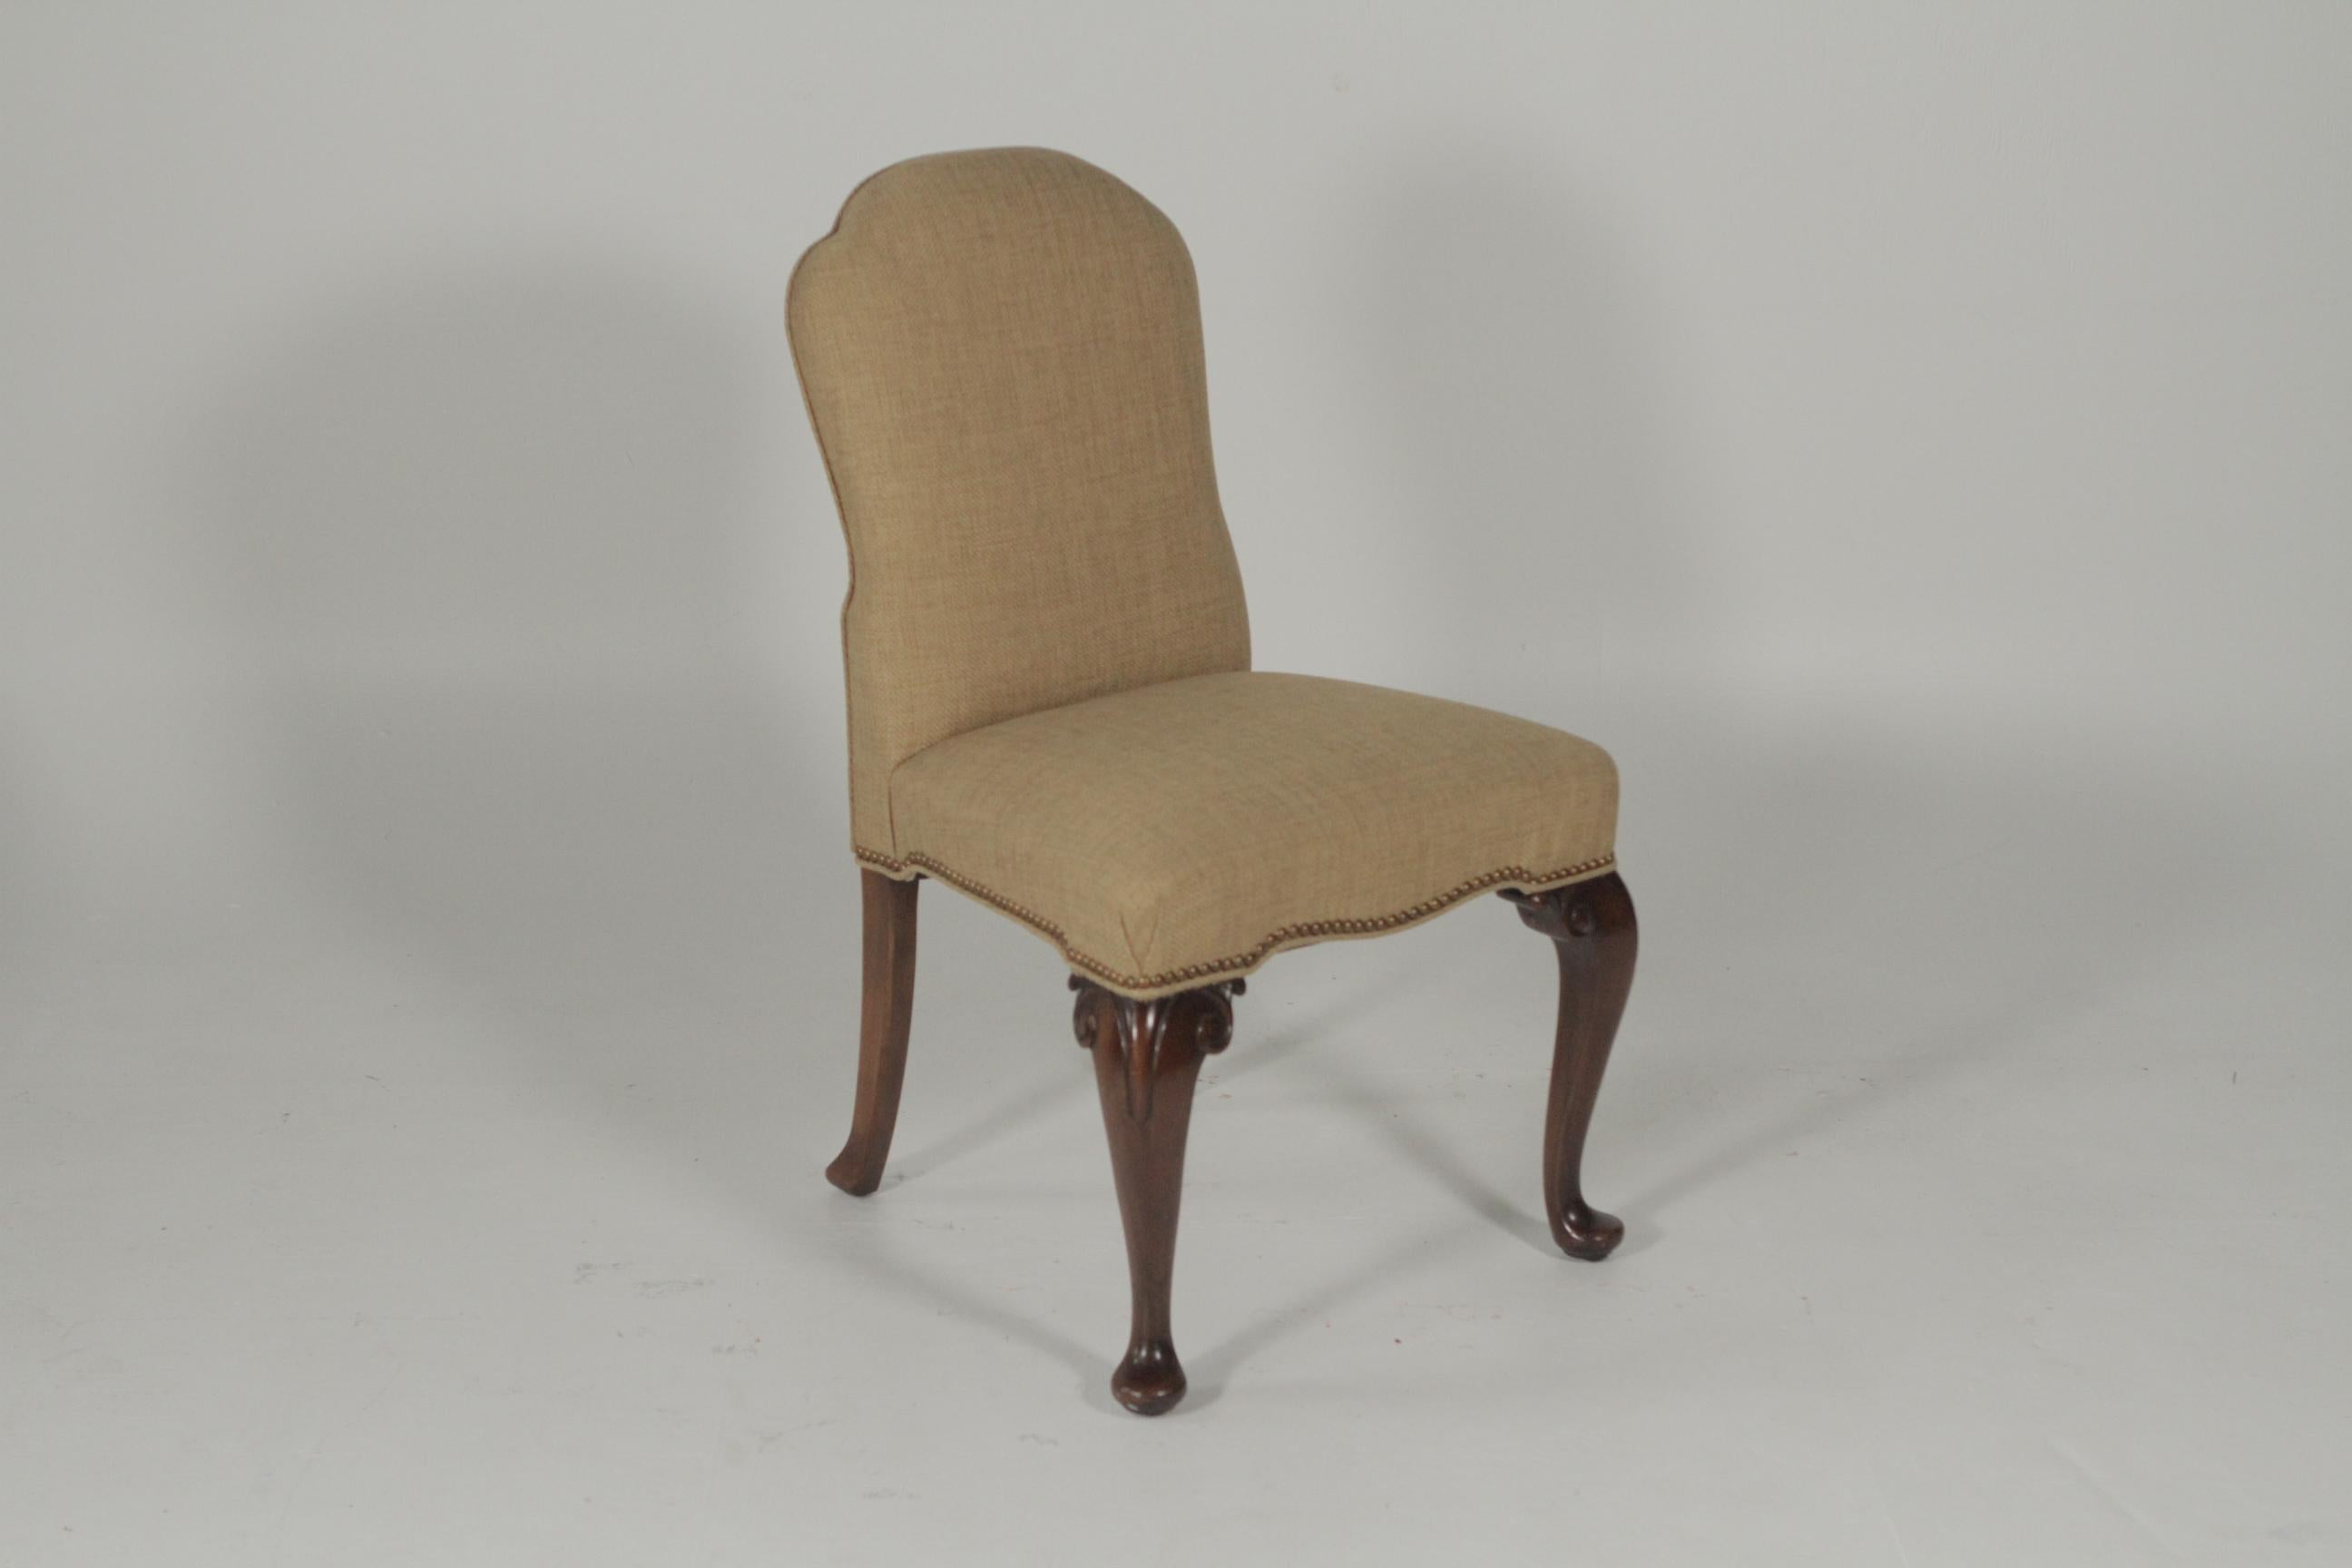 A set of six shapely dining chairs newly upholstered in a rustic cotton linen woven fabric by Farrell. The carved legs with brass nailhead trim all around. The fabric is soft to the touch and in a light neutral camel color.